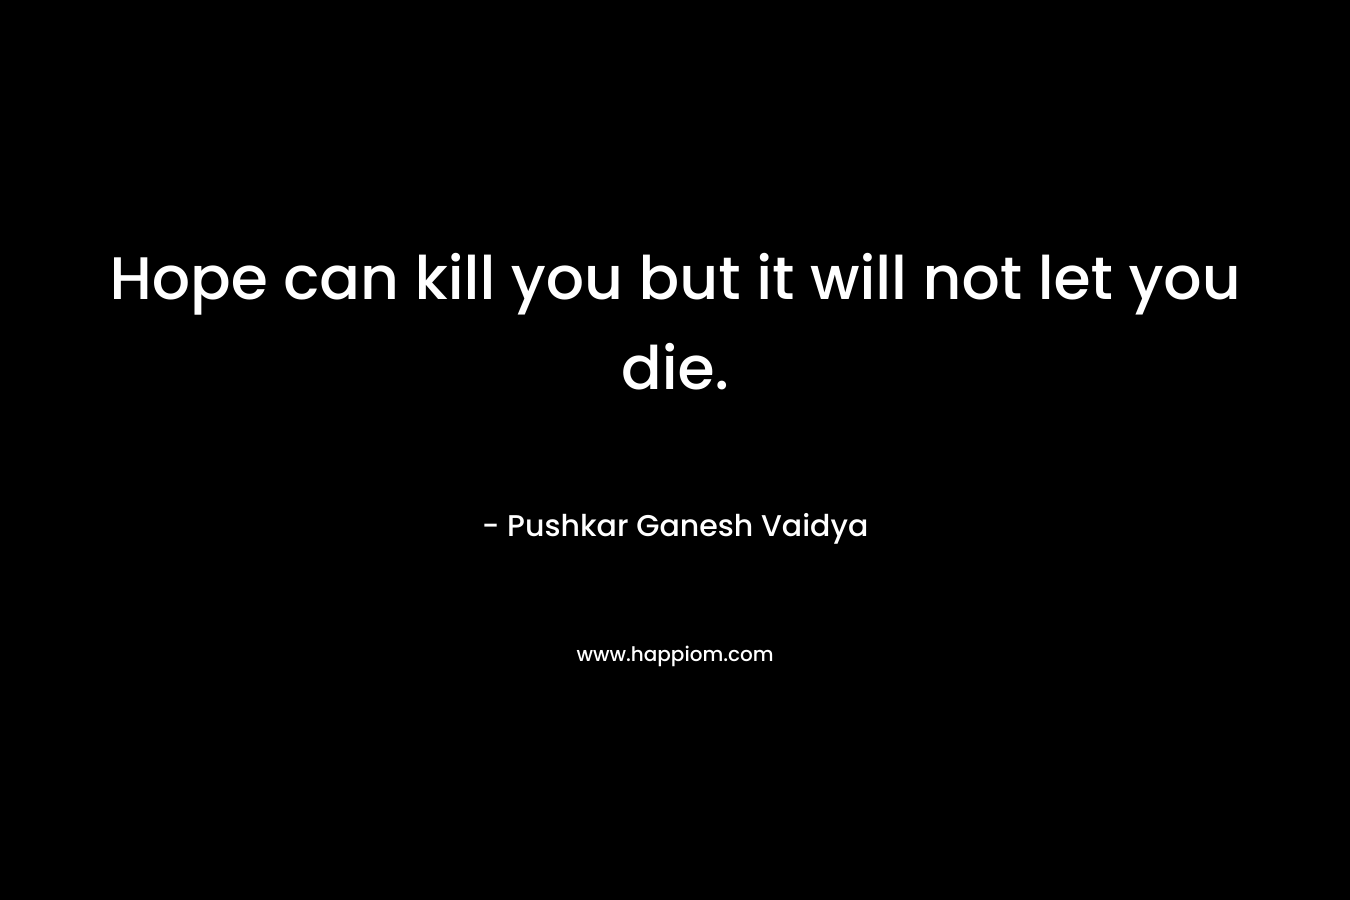 Hope can kill you but it will not let you die. – Pushkar Ganesh Vaidya